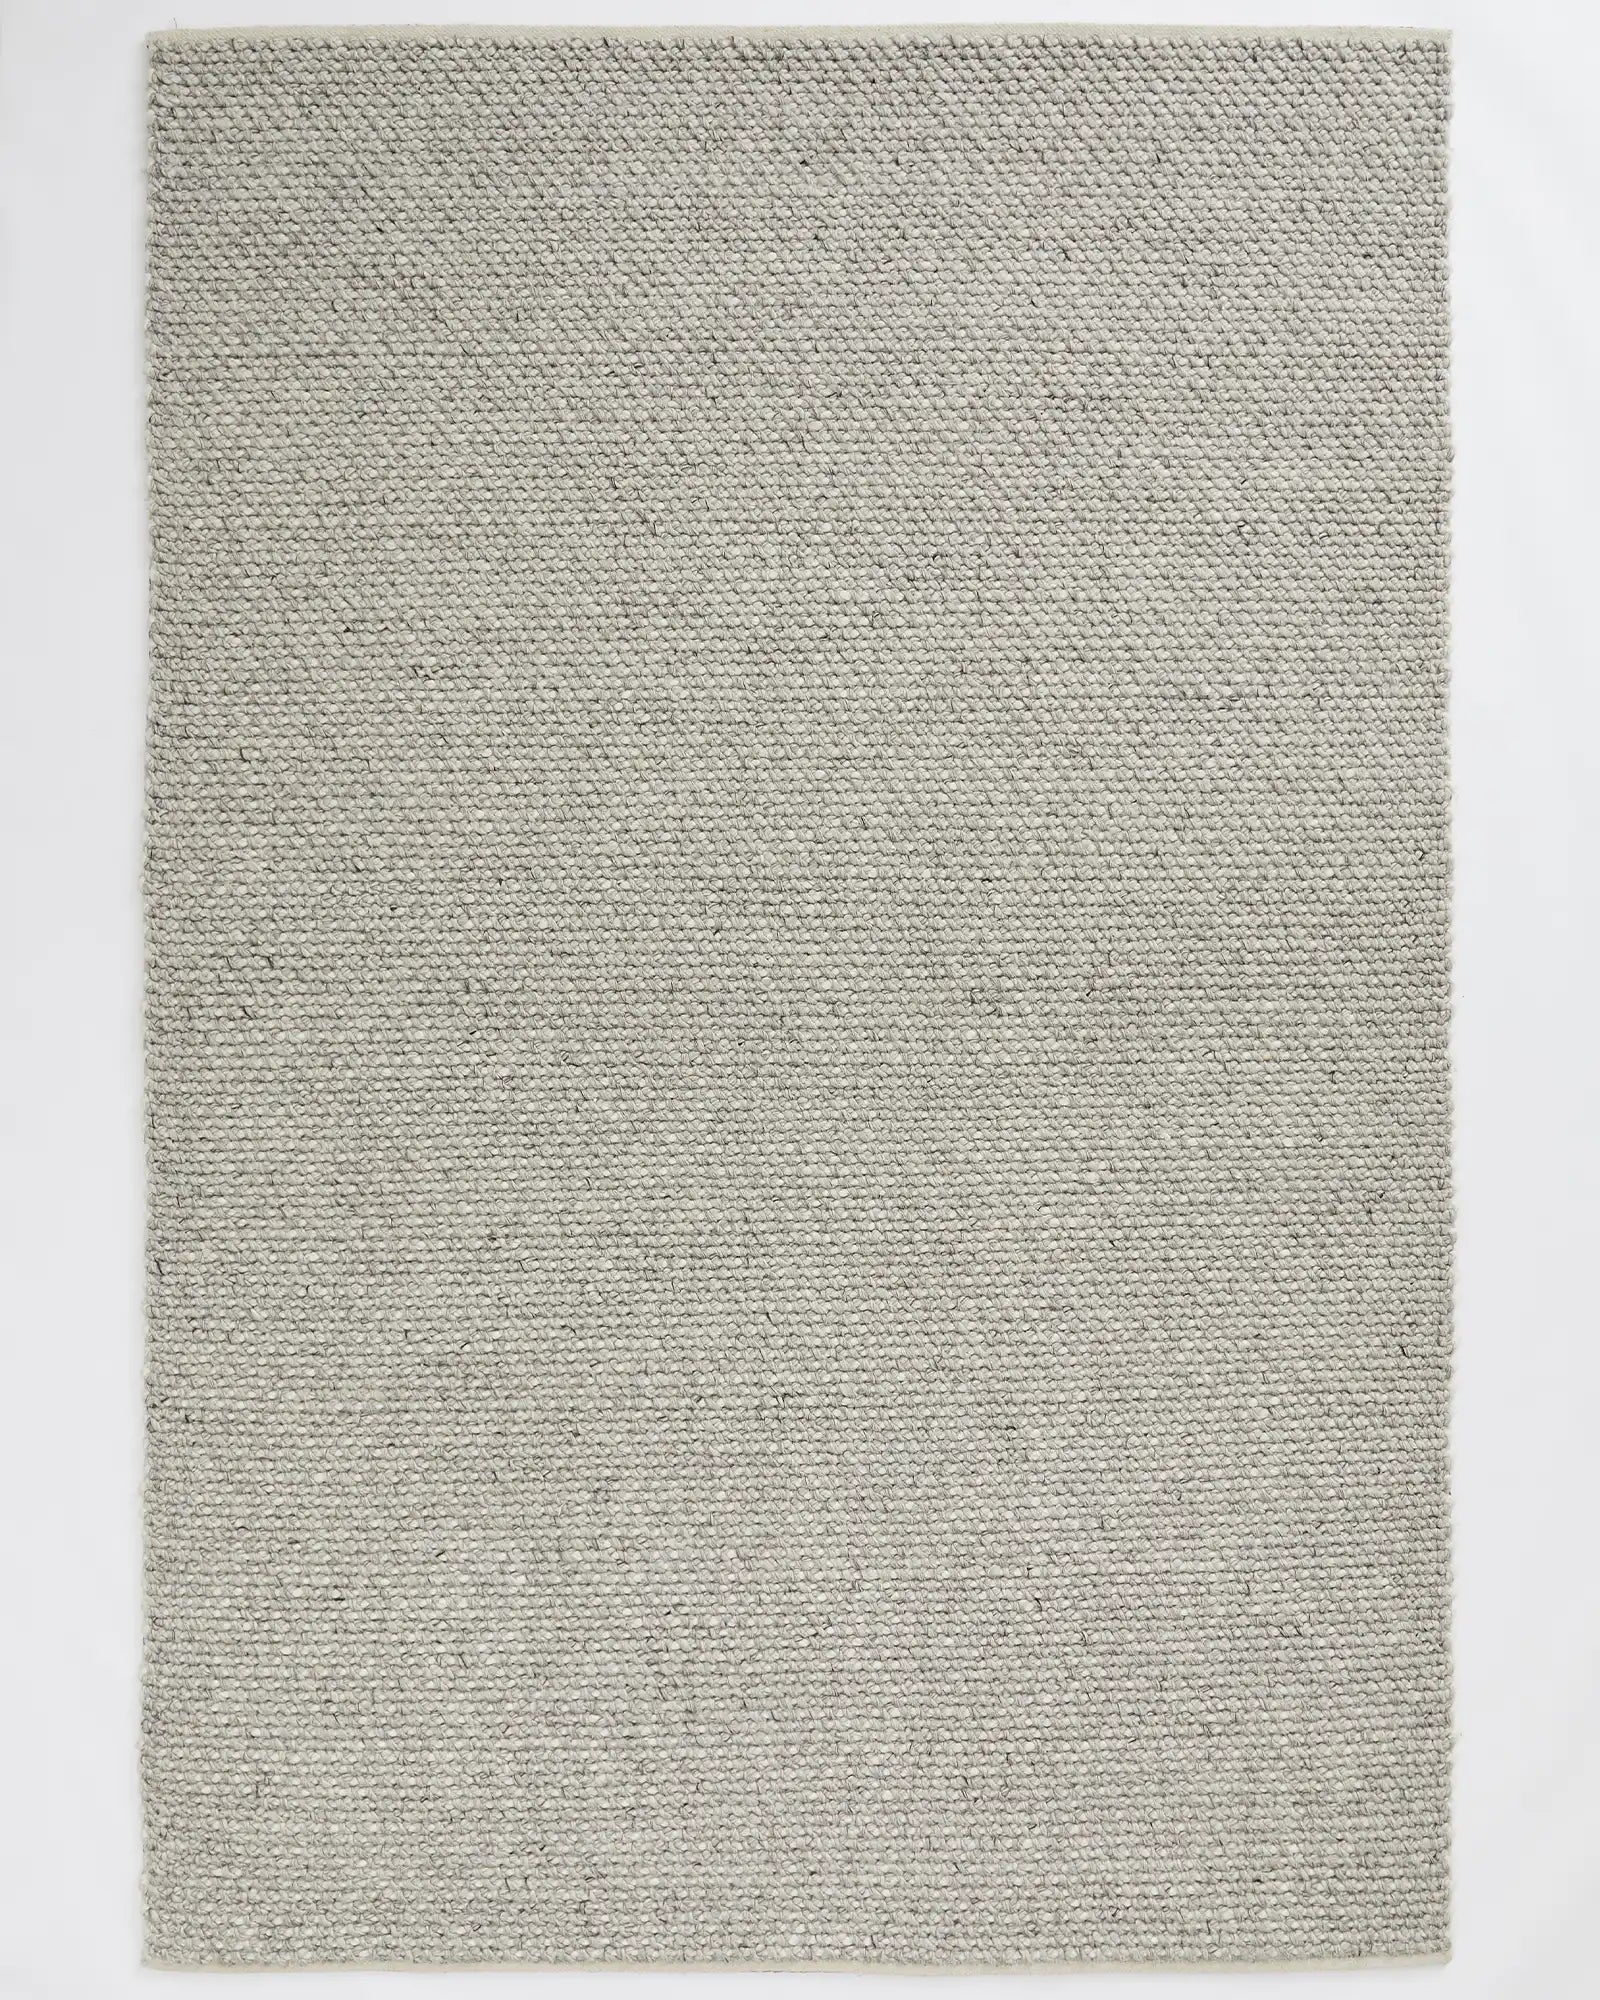 Weave Emerson Rug - Feather